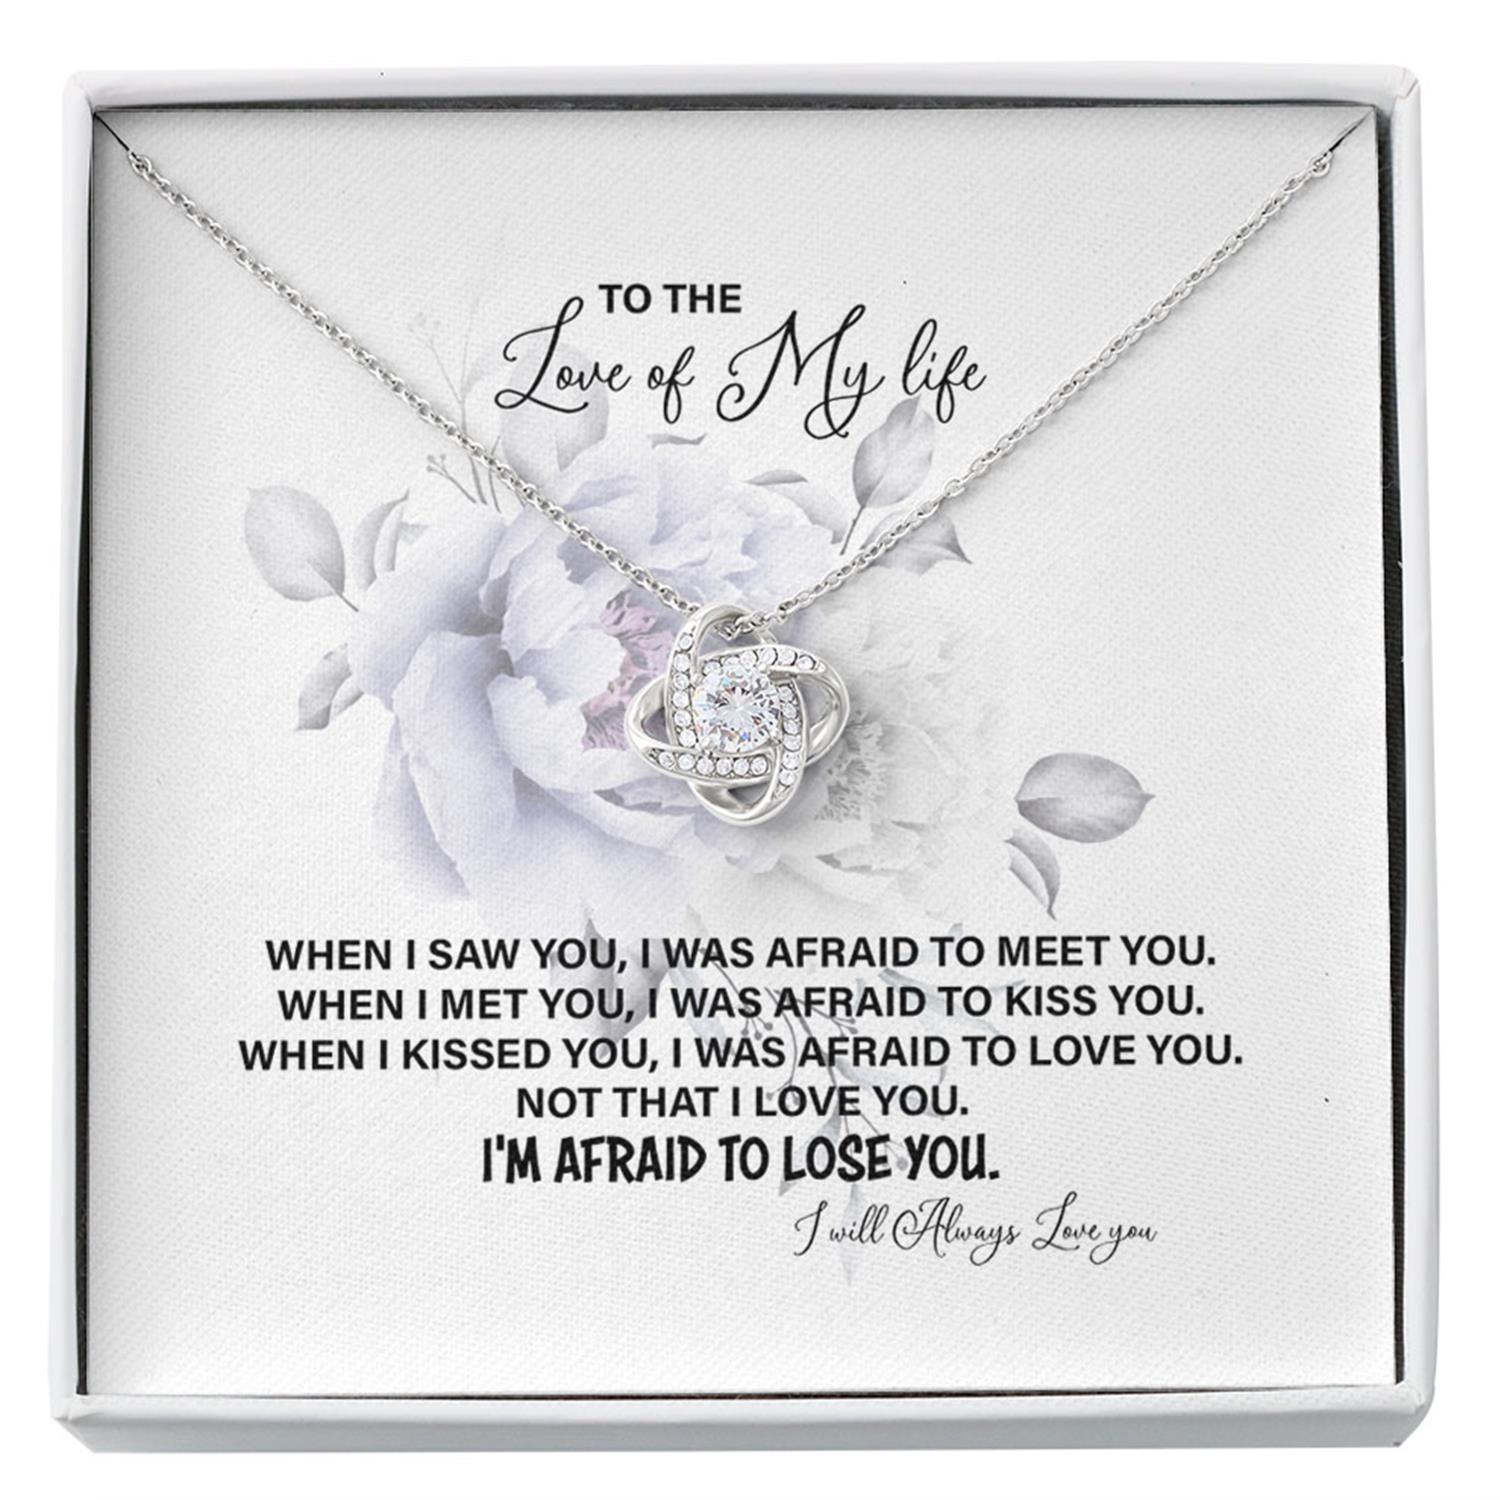 Girlfriend Necklace, To The Love Of My Life "Afraid To Lose You" Necklace. Gift For Fiance, Future Wife Custom Necklace